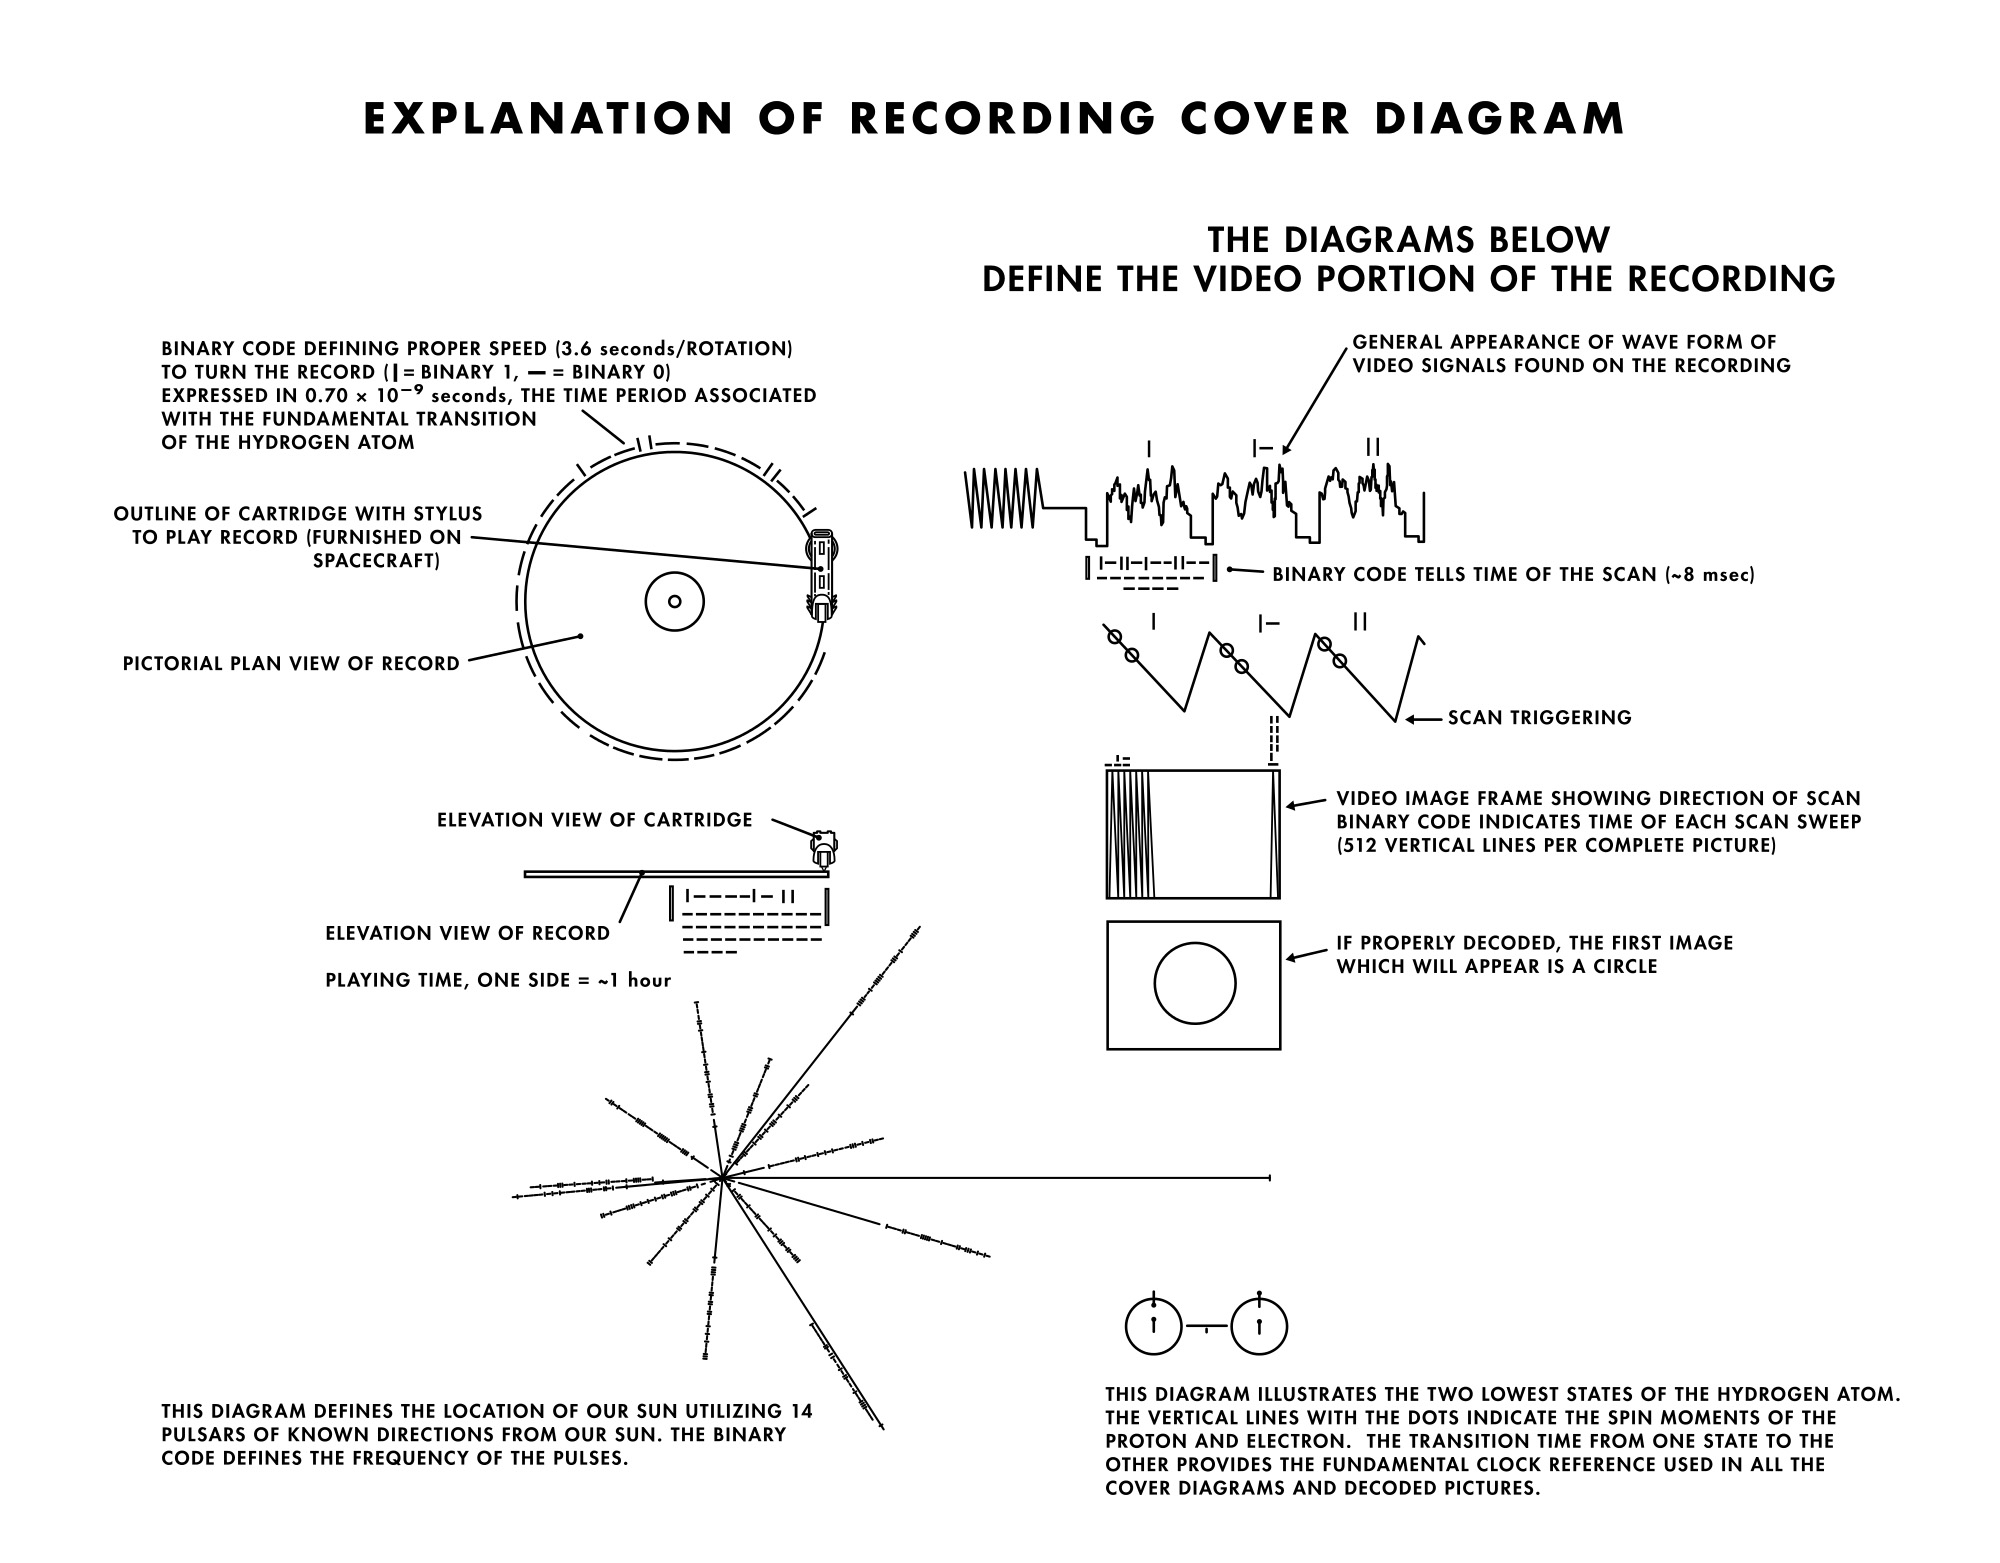 music on the voyager spacecraft